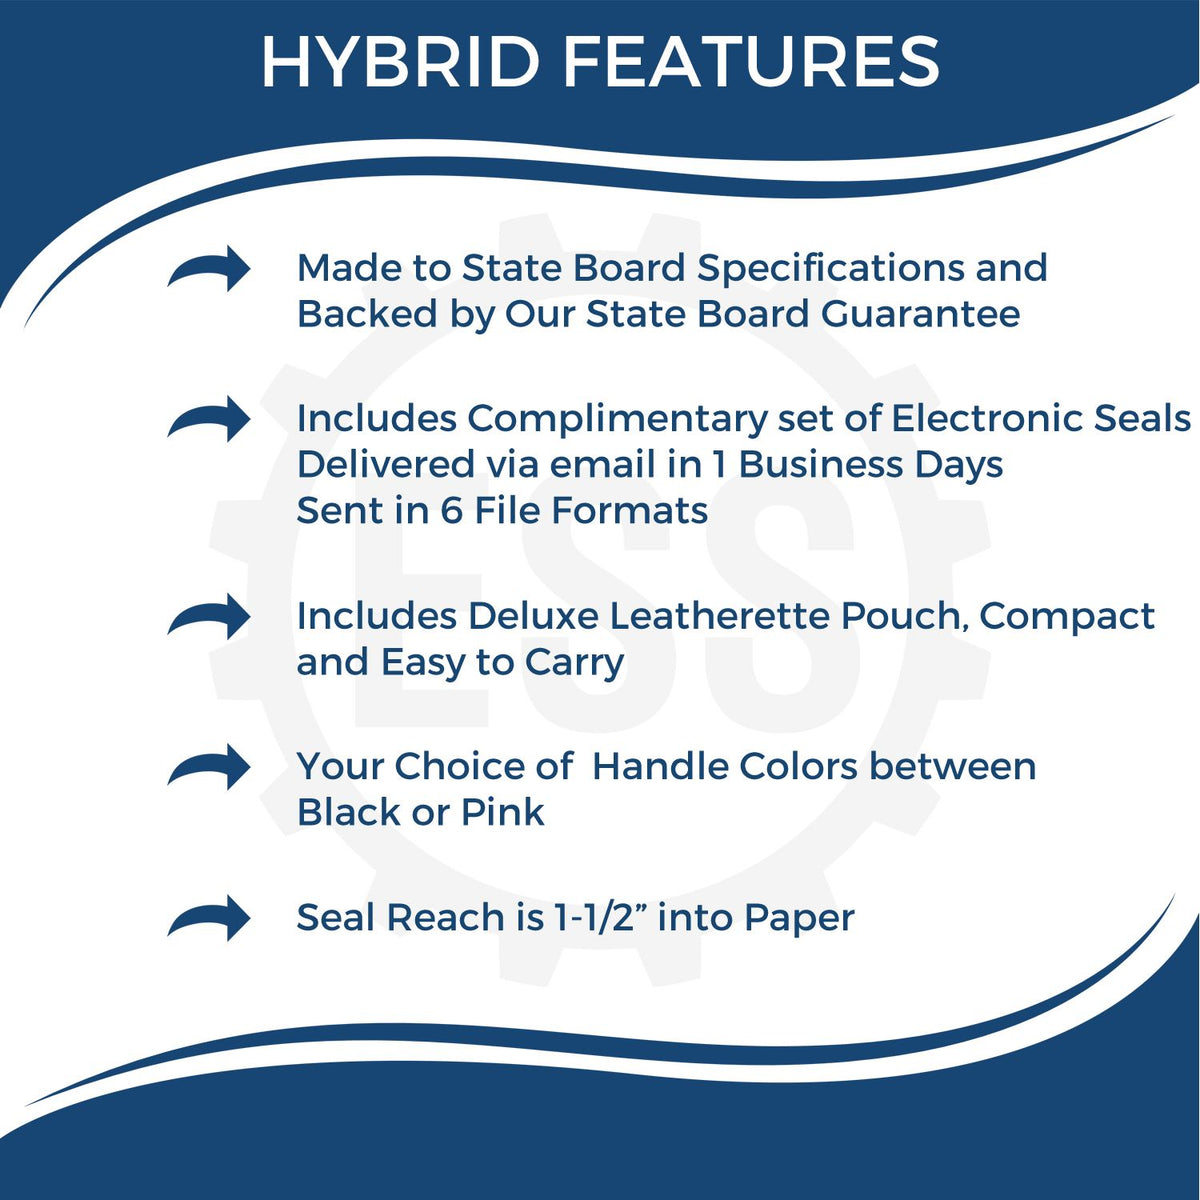 A picture of an infographic highlighting the selling points for the Hybrid New Hampshire Engineer Seal